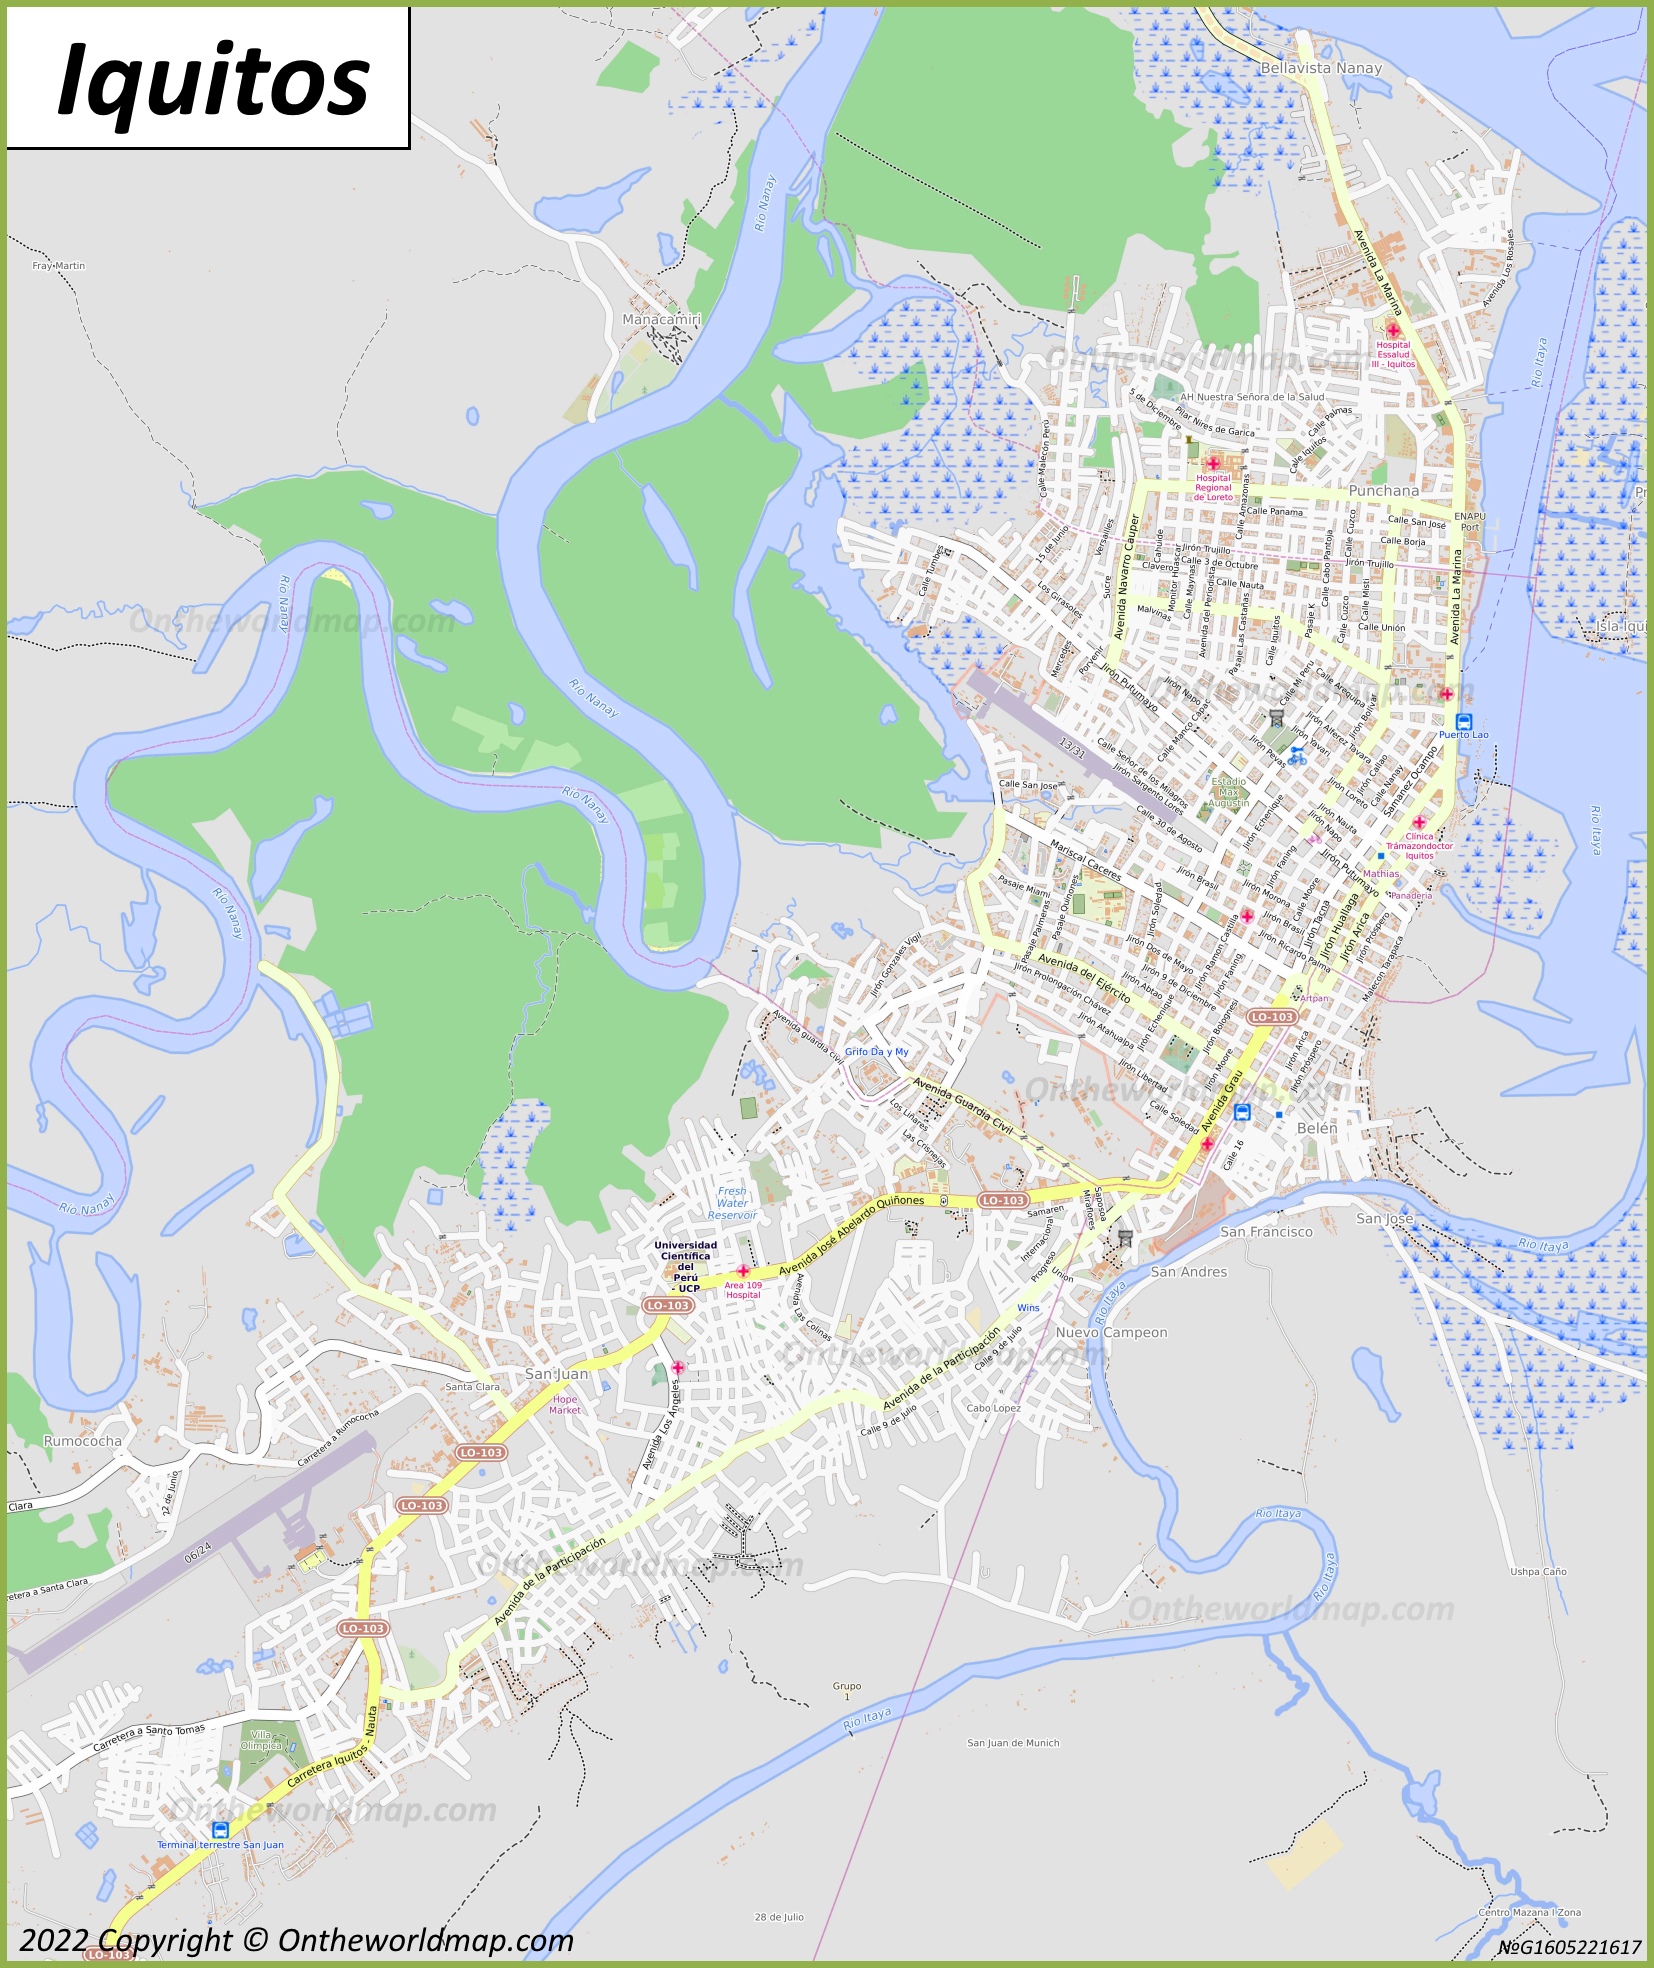 Map of Iquitos